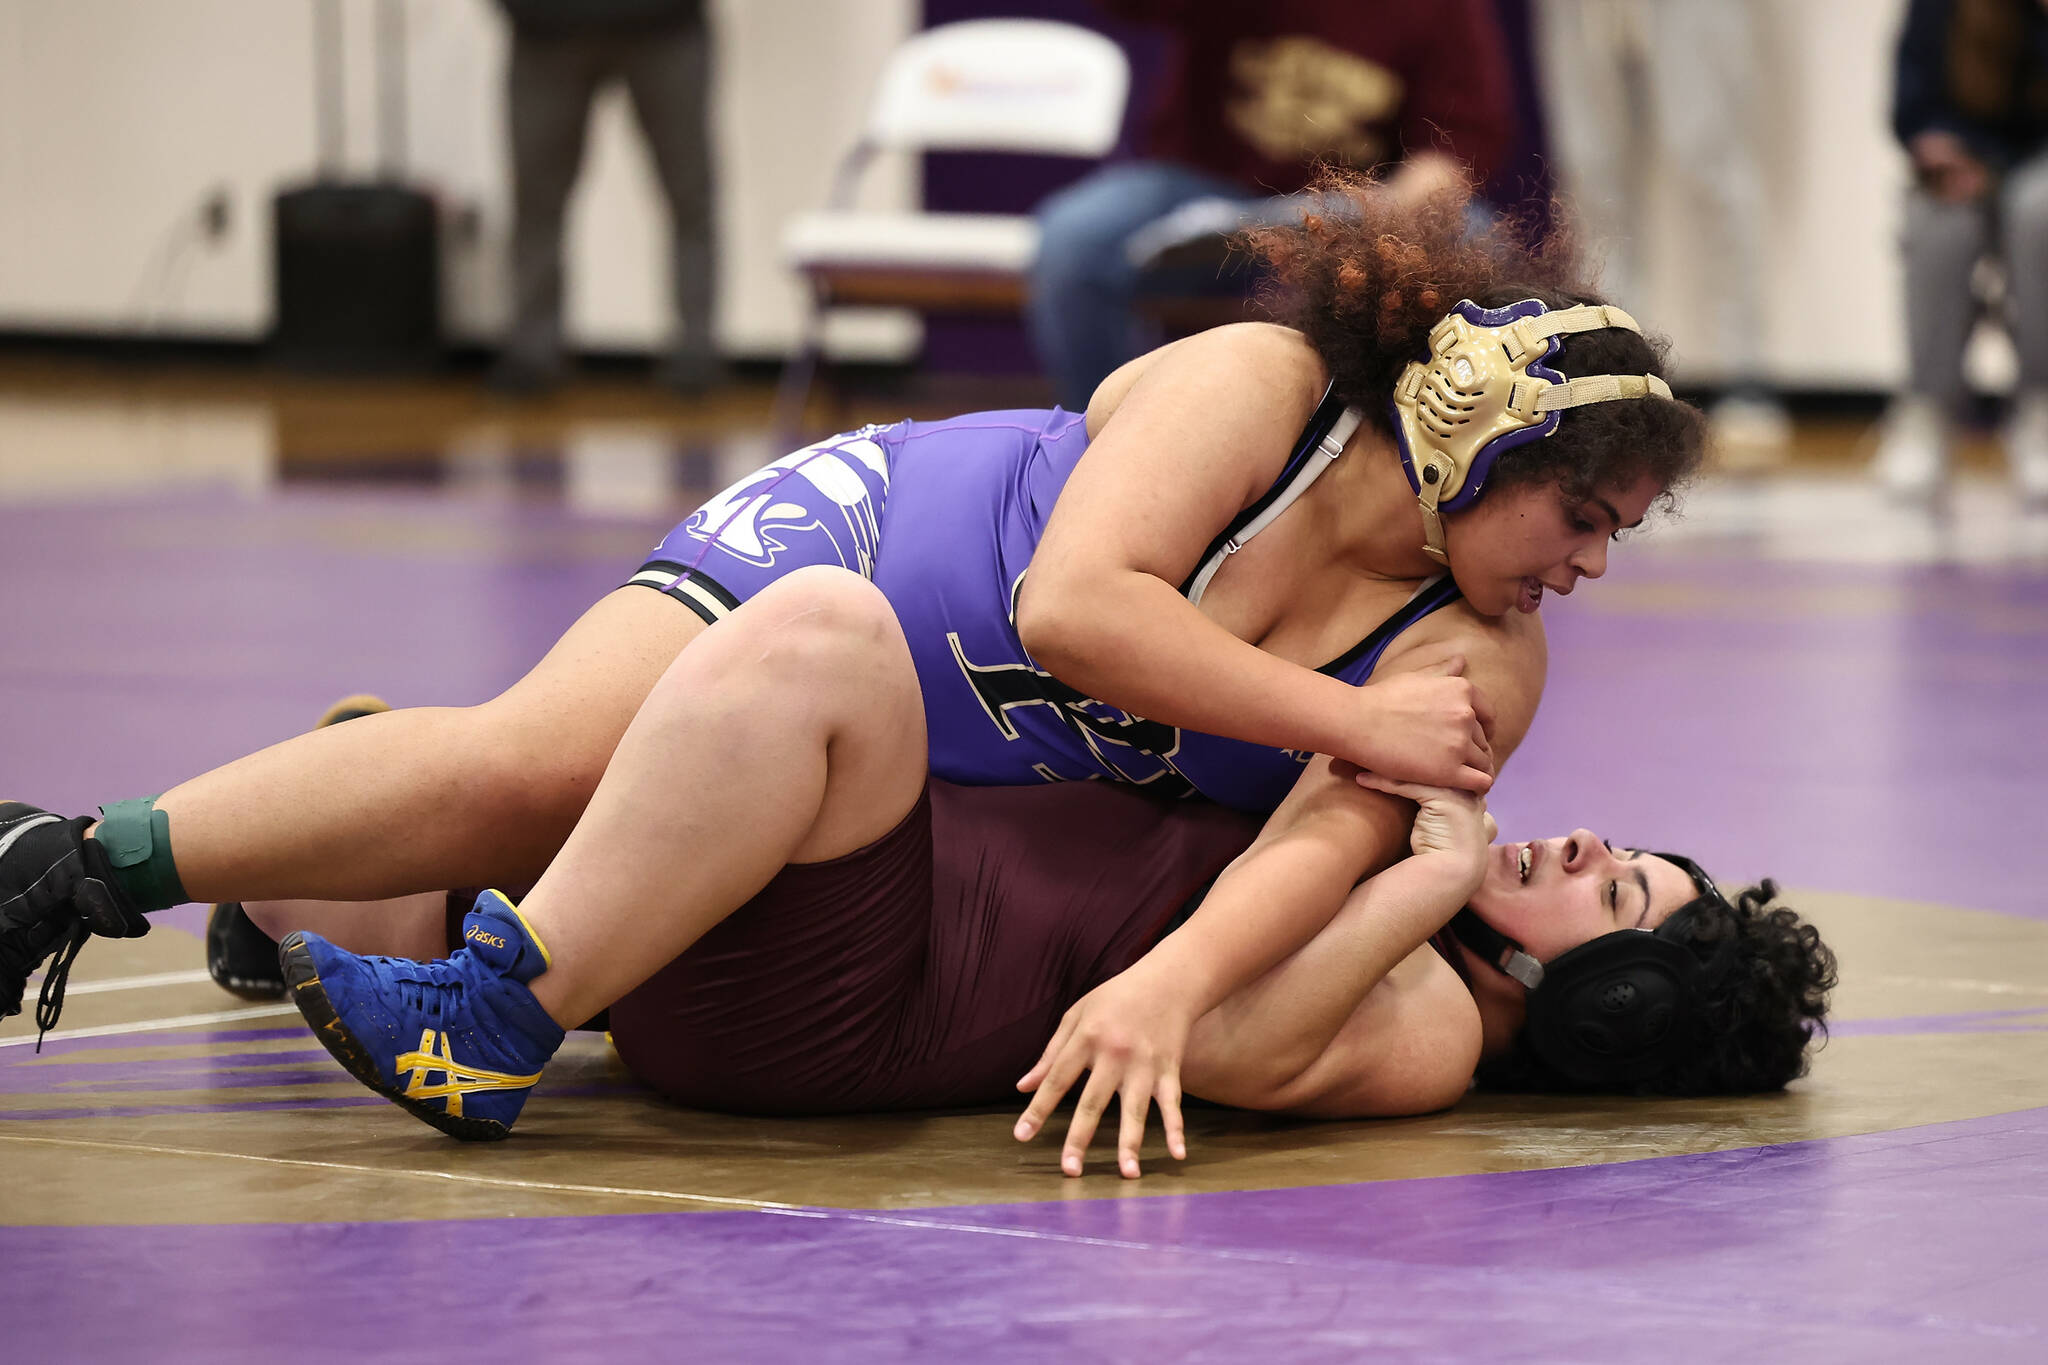 Photo by John Fisken
Oak Harbor athlete Tiayanna Gibson wrestles with Lakewood athlete Abby Loza during a Dec. 7 match. Oak Harbor defeated Lakewood 66-12 at the first competition of the season.